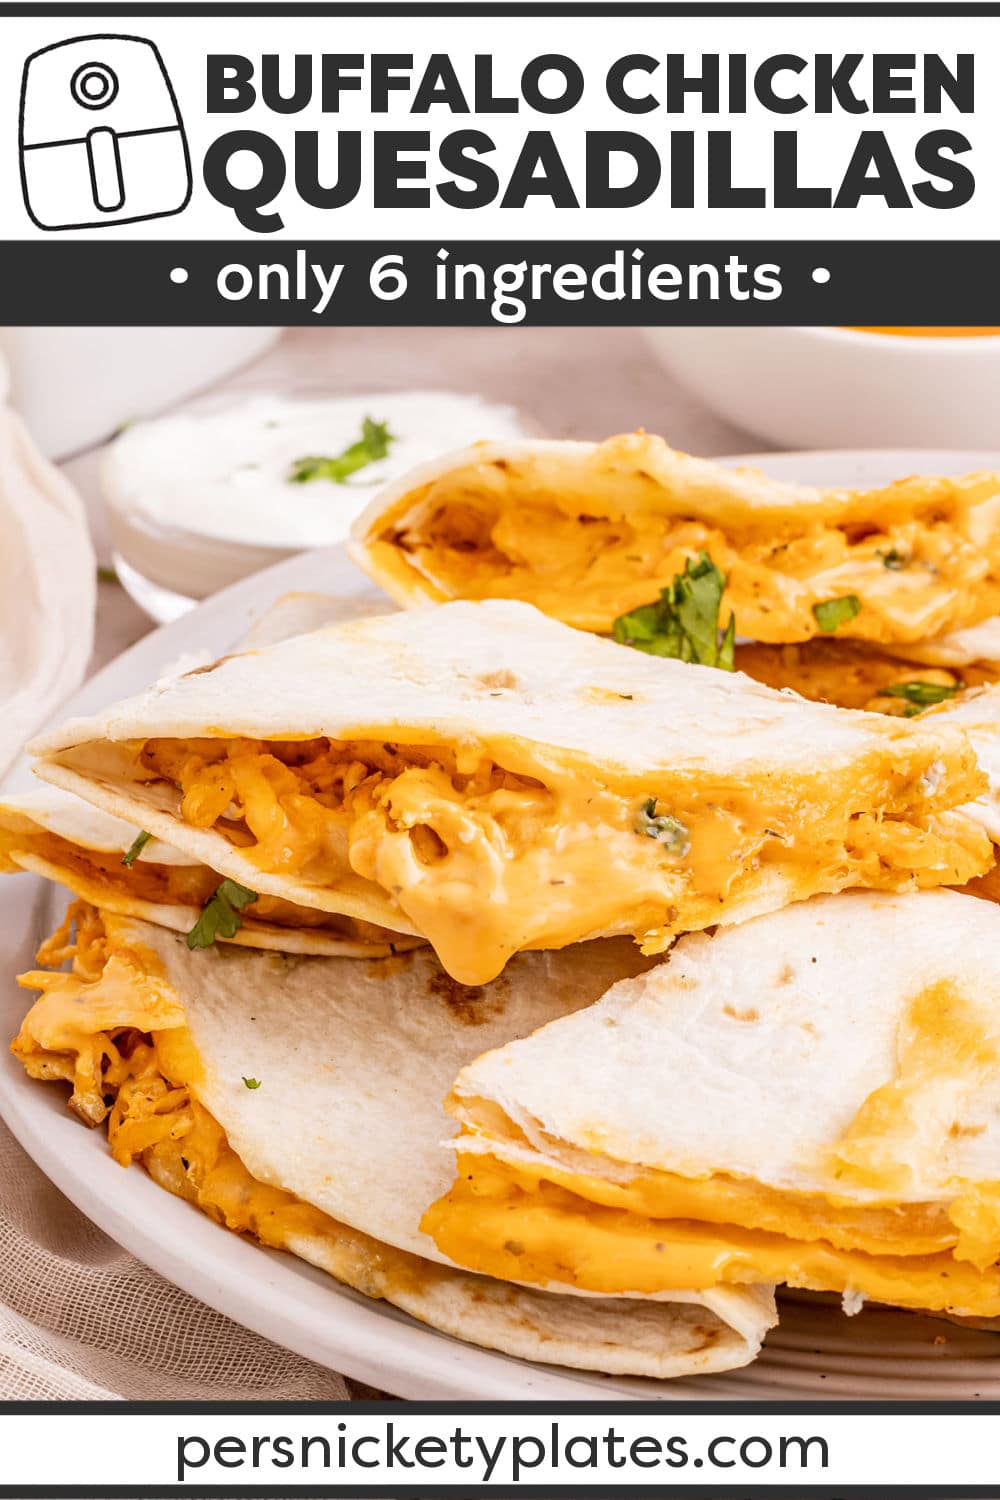 Air fryer Buffalo chicken quesadillas are made with shredded chicken smothered in tangy, spicy, buffalo sauce and cool creamy ranch dressing stuffed in a tortilla shell along with cheddar and blue cheese. They’re folded and air fried until crispy golden brown on the outside and melty, saucy, and delicious on the inside! | www.persnicketyplates.com